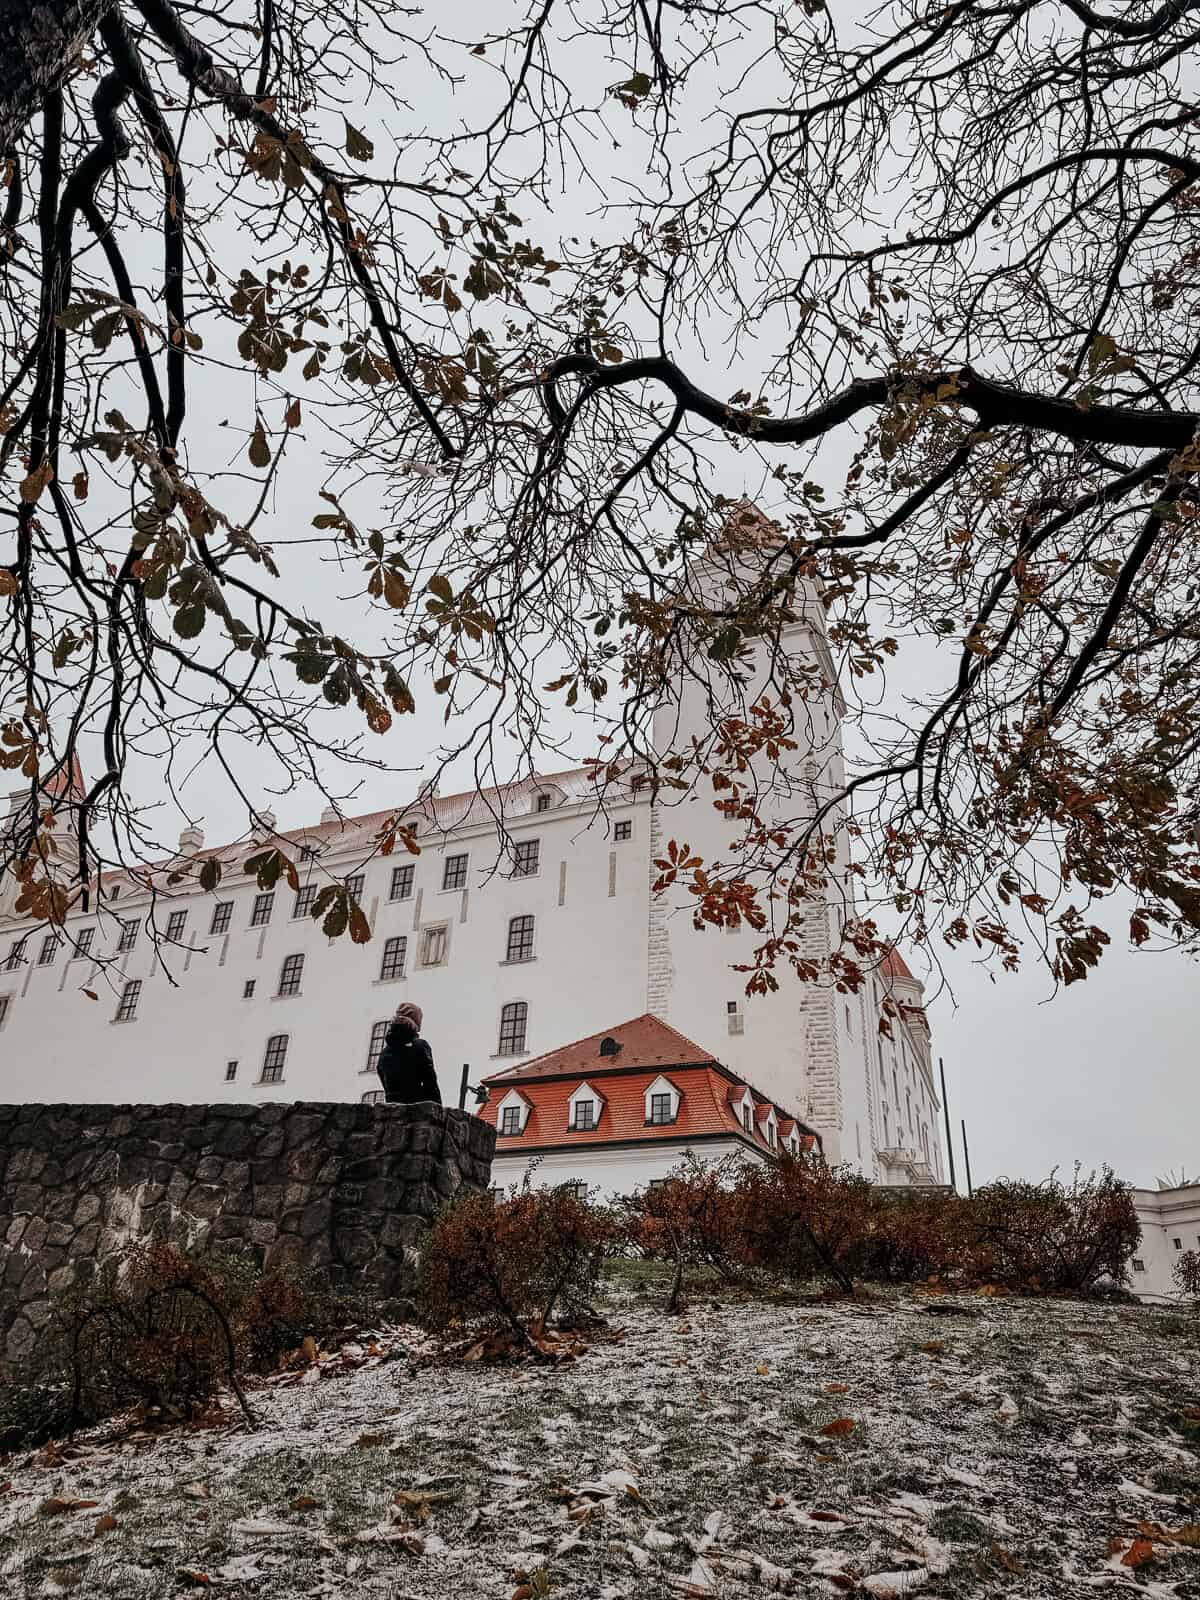 A silhouette of a person standing on a hill, looking at Bratislava Castle partially obscured by bare branches, with a dusting of snow on the ground.